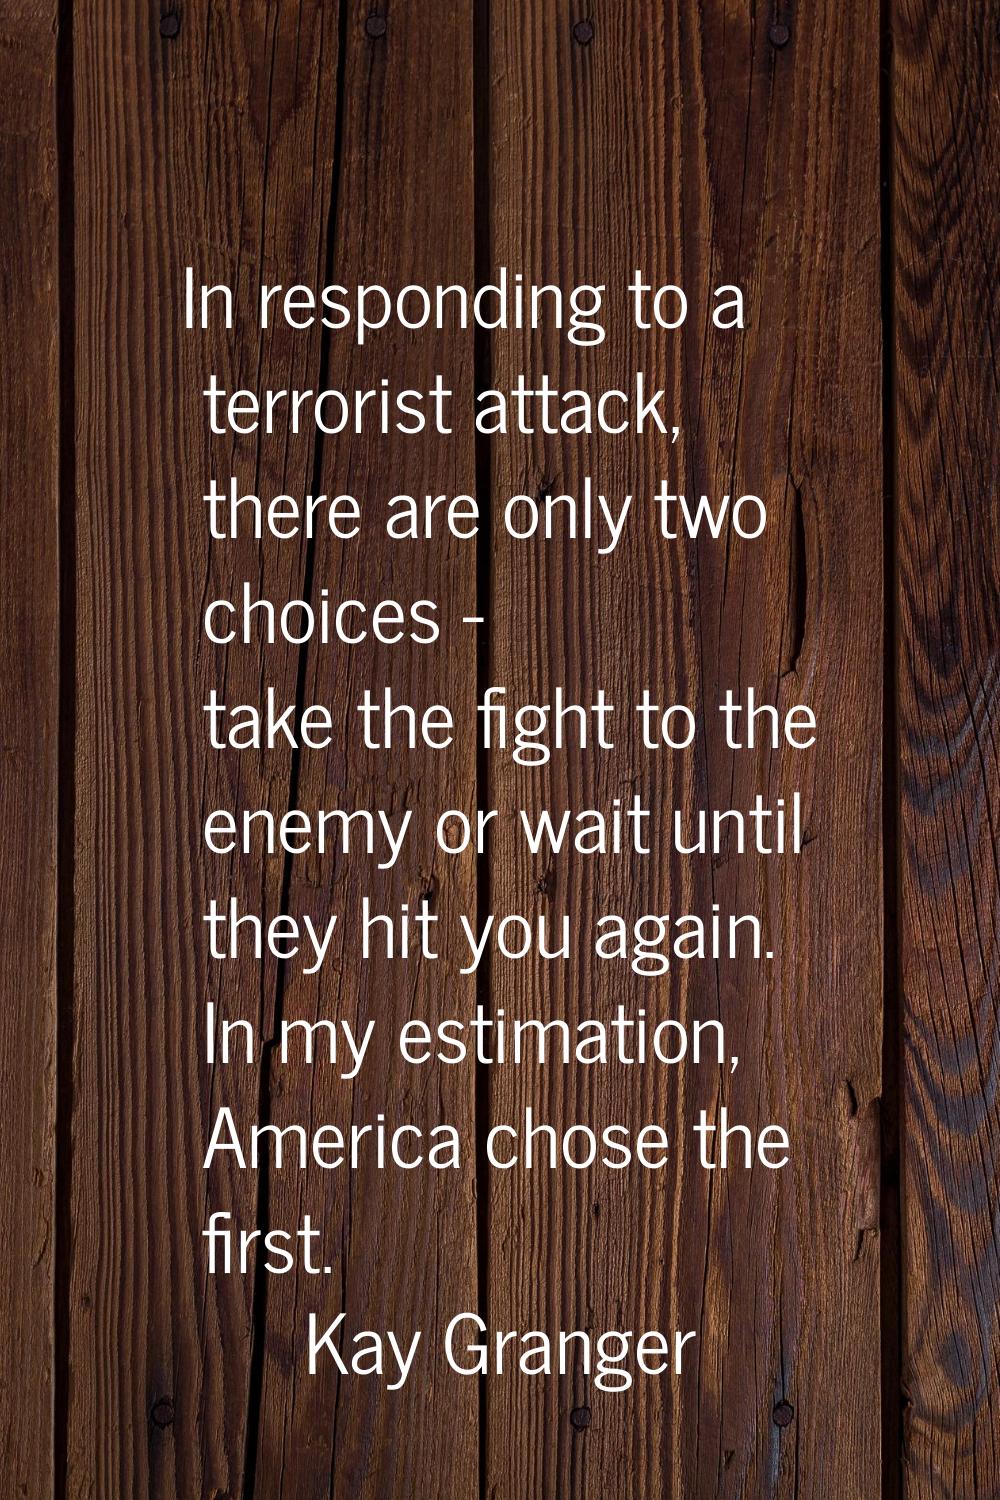 In responding to a terrorist attack, there are only two choices - take the fight to the enemy or wa